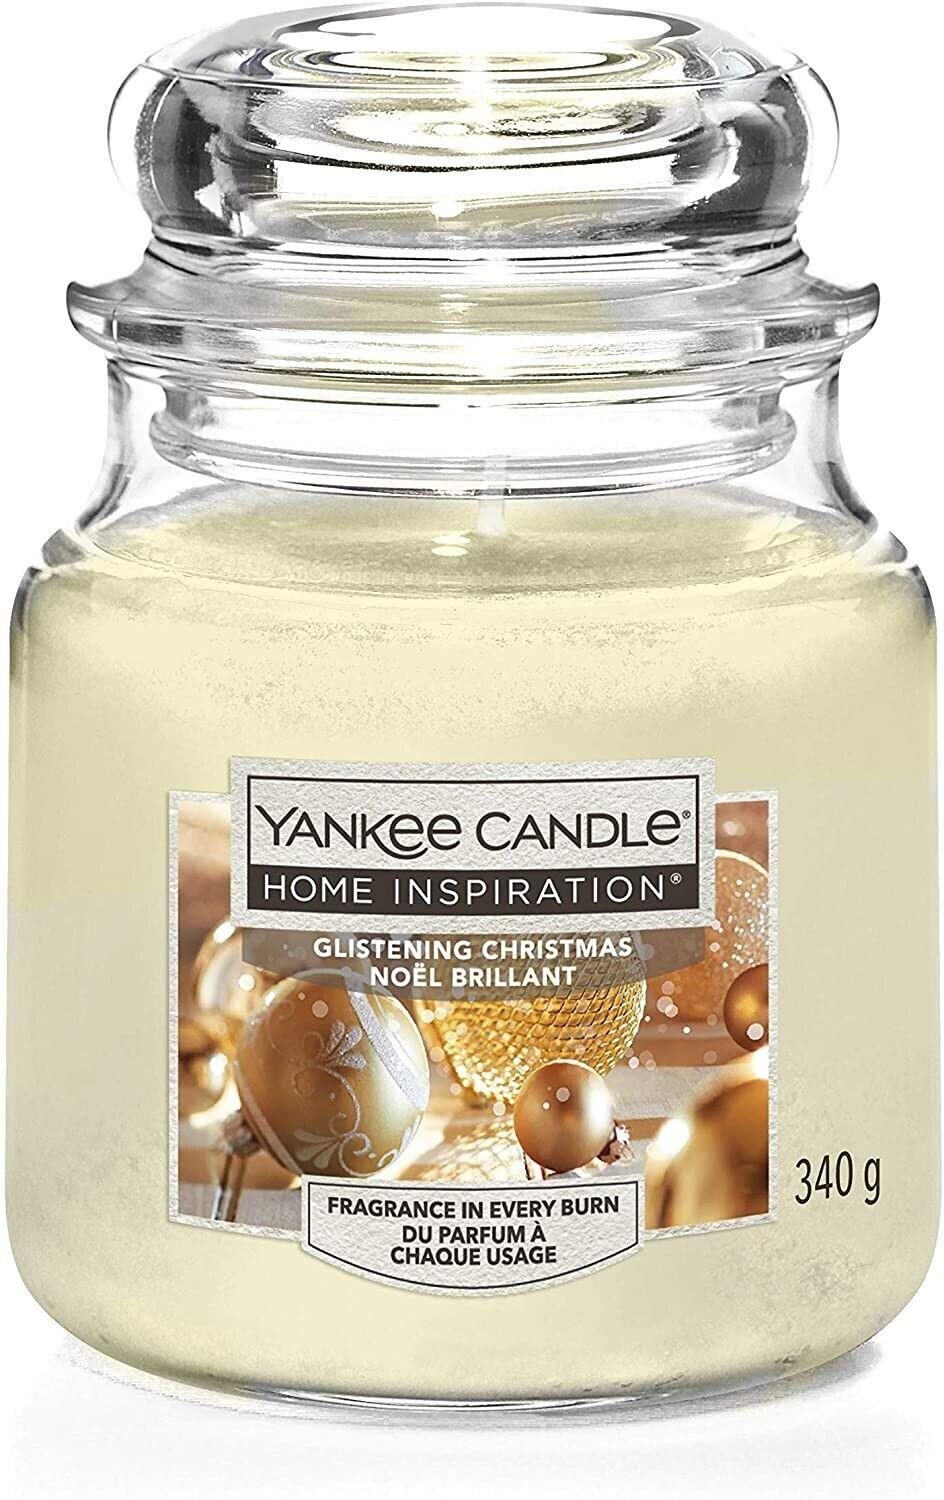 YANKEE CANDLE Home Inspiration Glistening Christmas 340 g